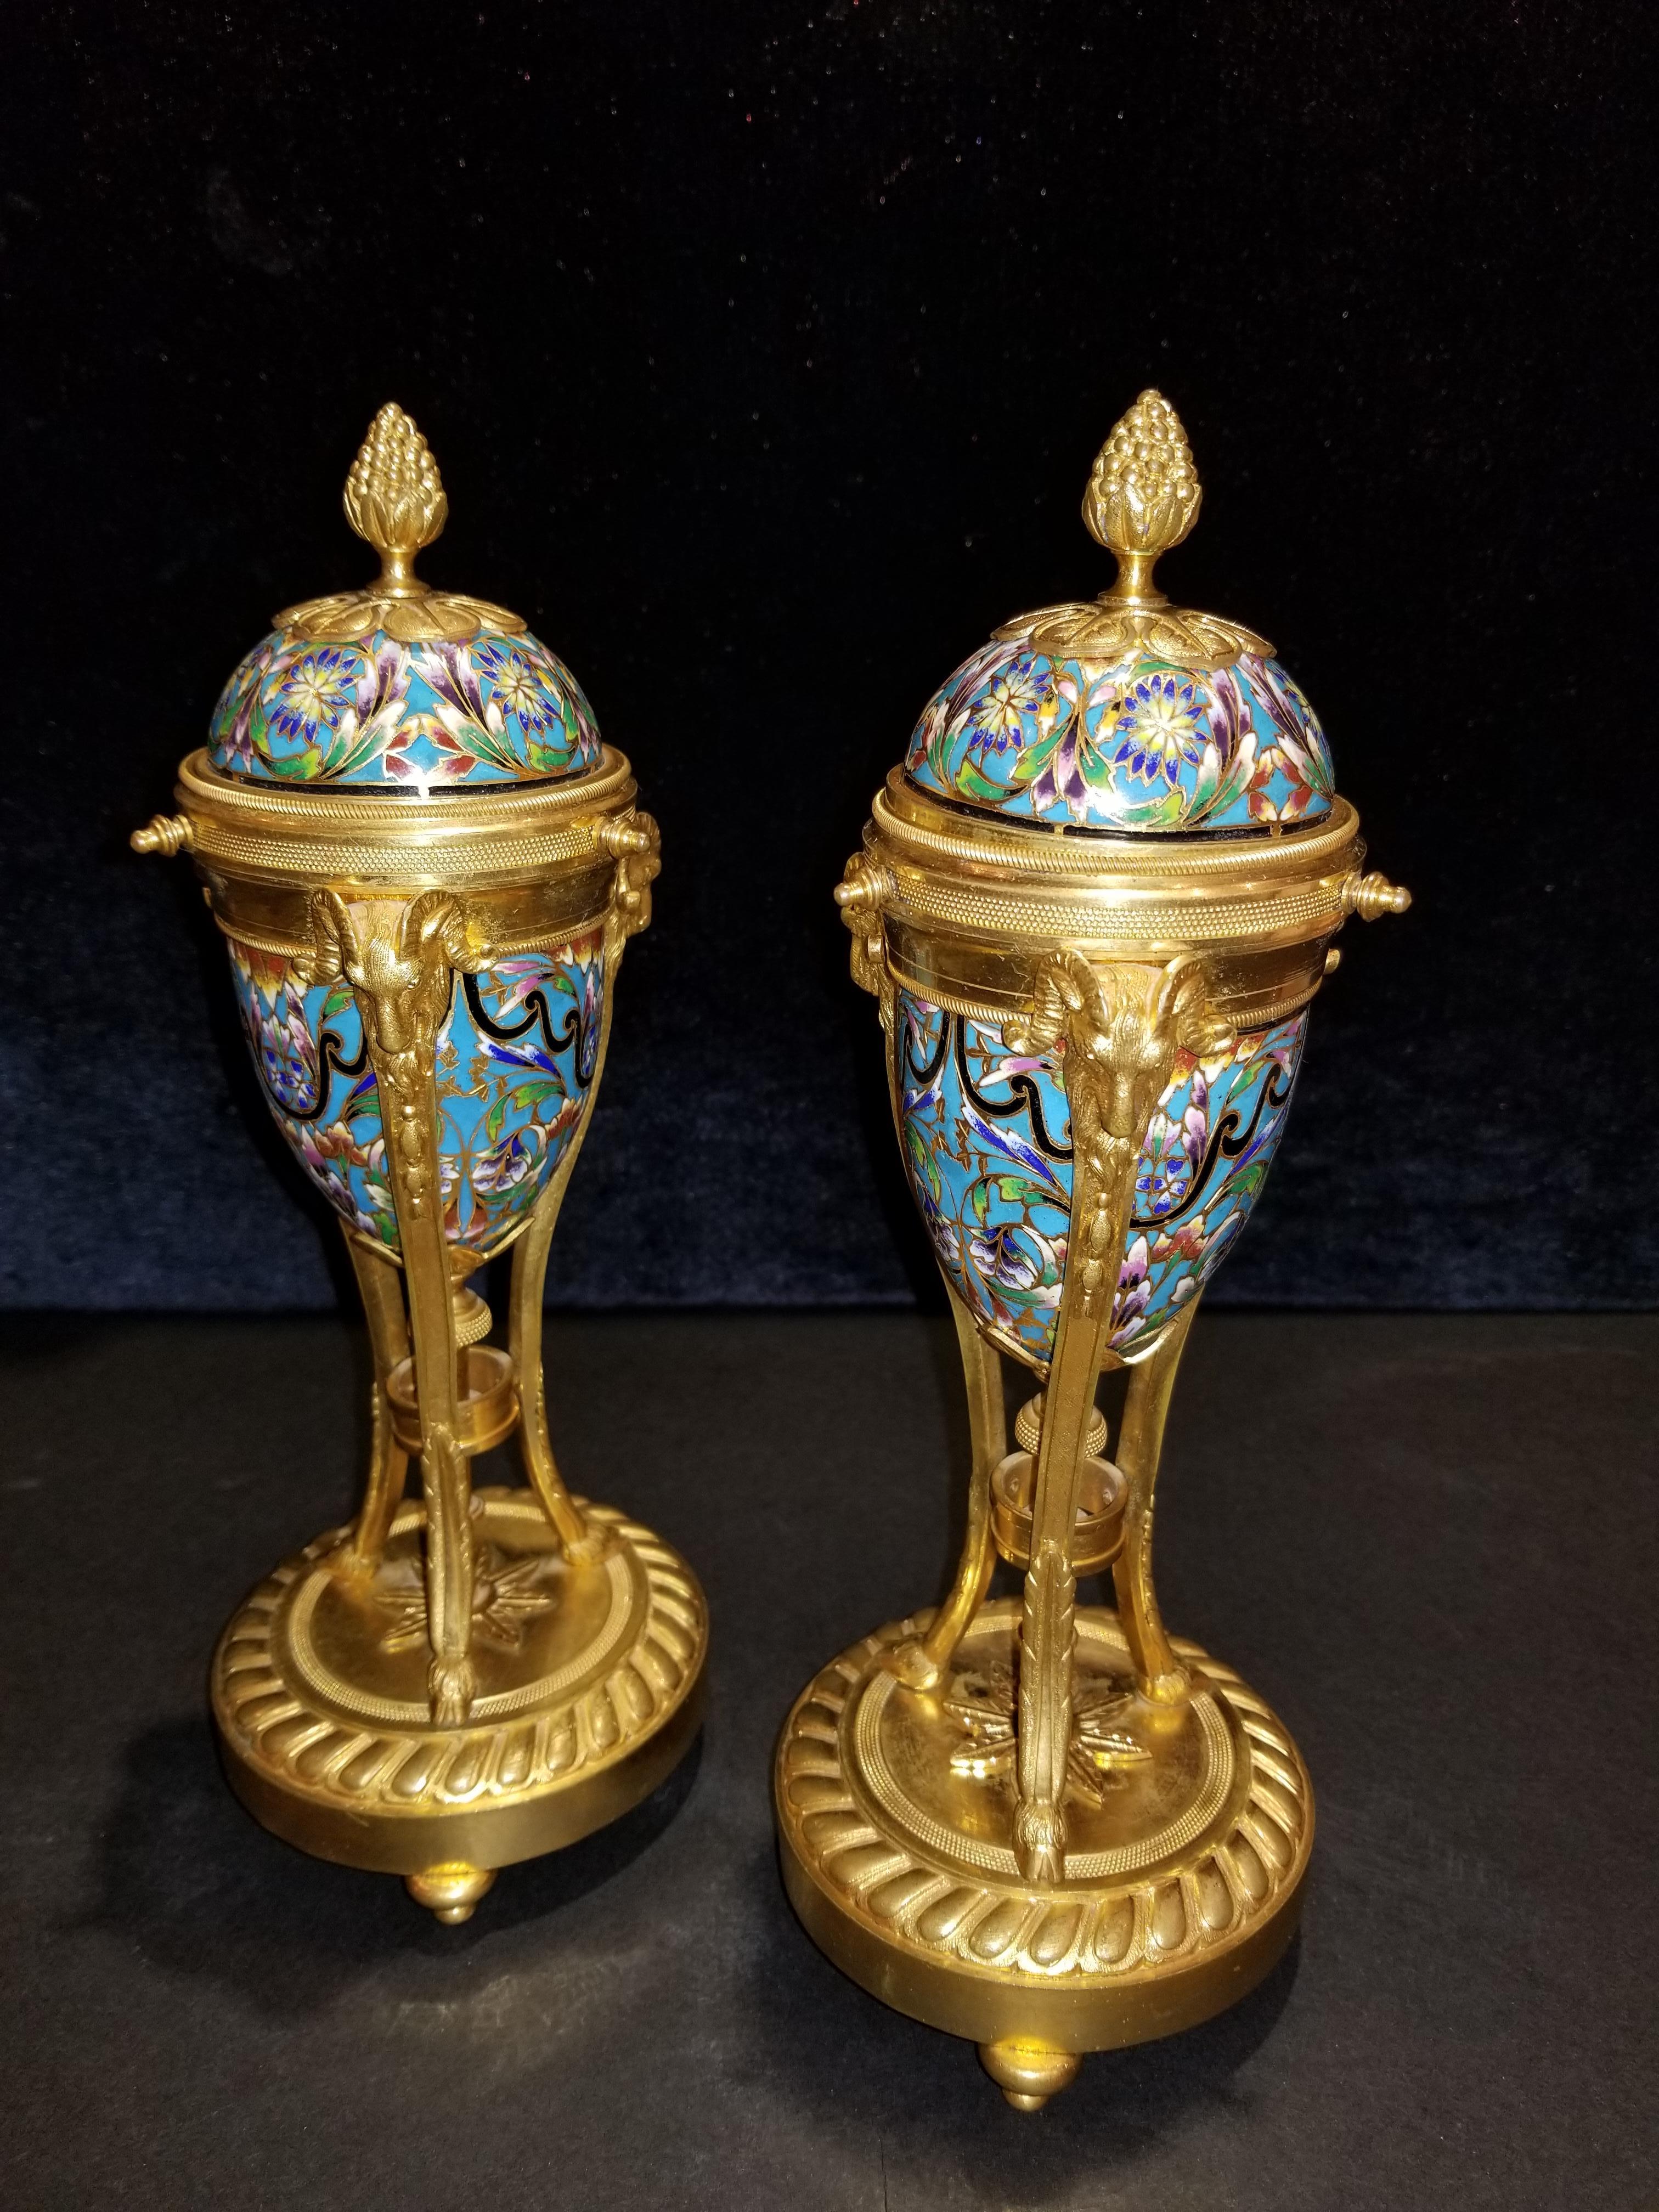 A fine pair of antique French cloisonné enamel and ormolu cassolettes. Cassolettes severed a duel purpose; they would be admired for their beauty during the day, and at night, the lids would be flipped and serve as candlesticks. This beautiful pair